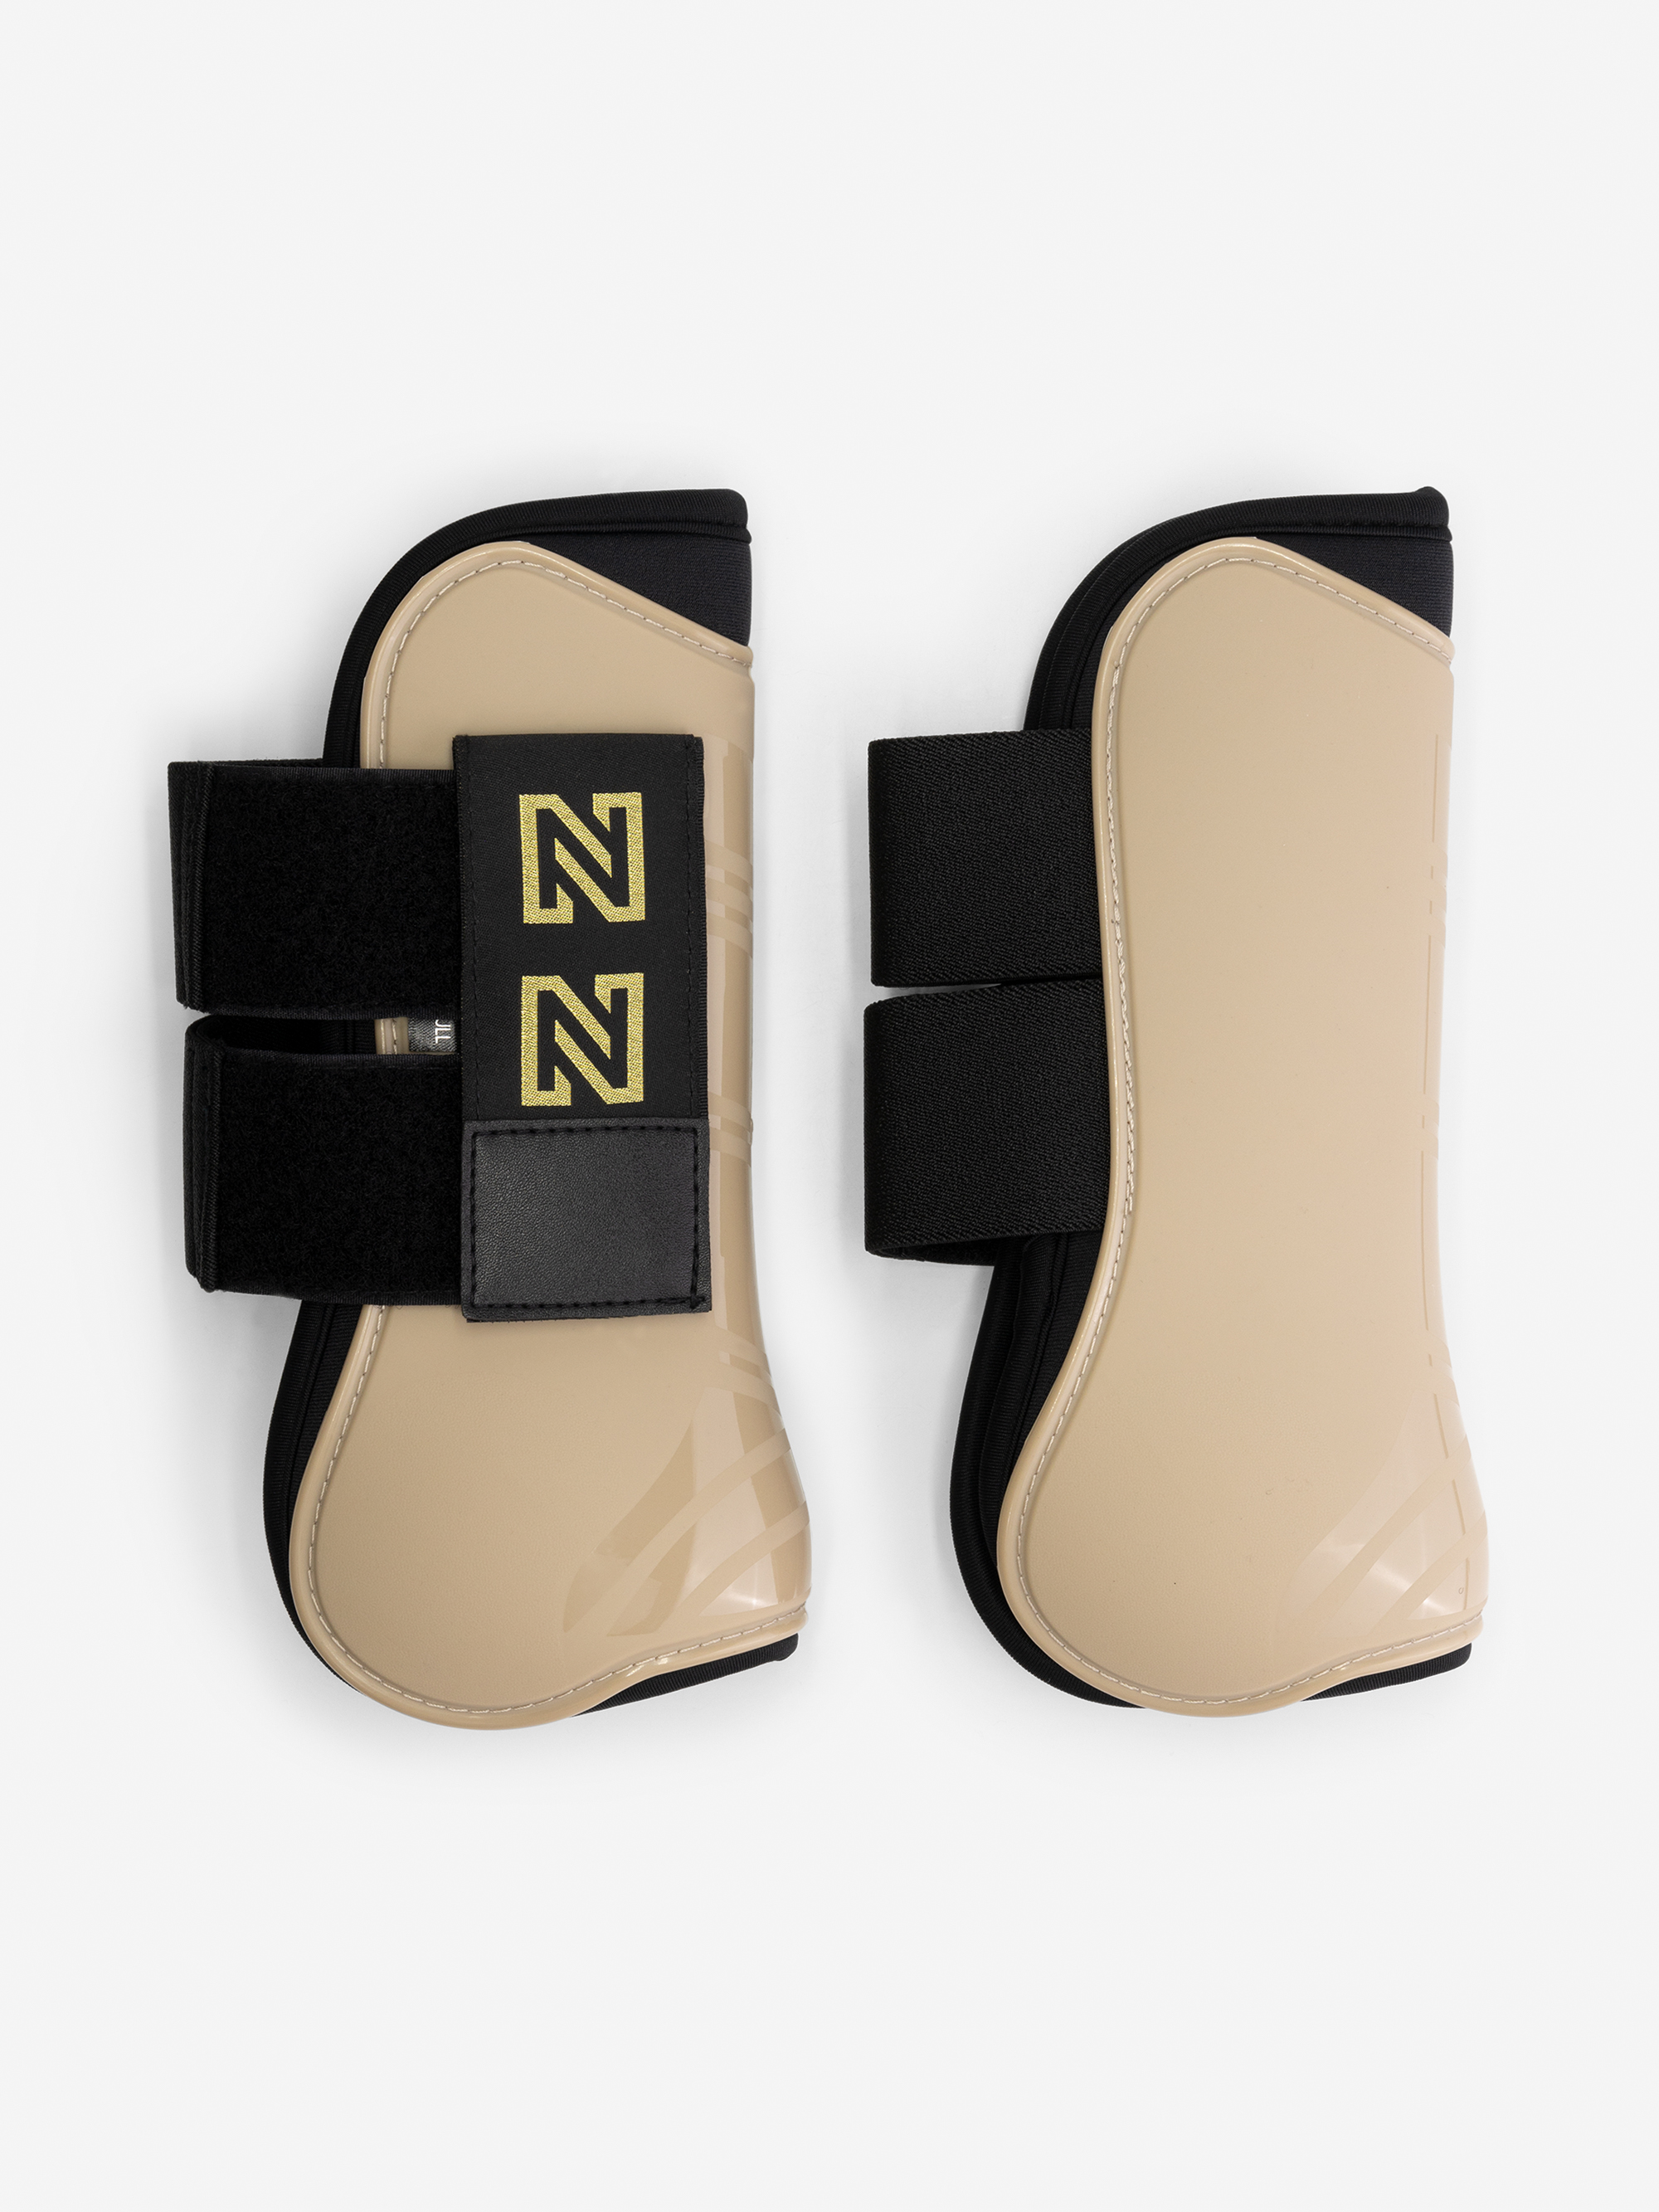 Tendon Boots with N logo